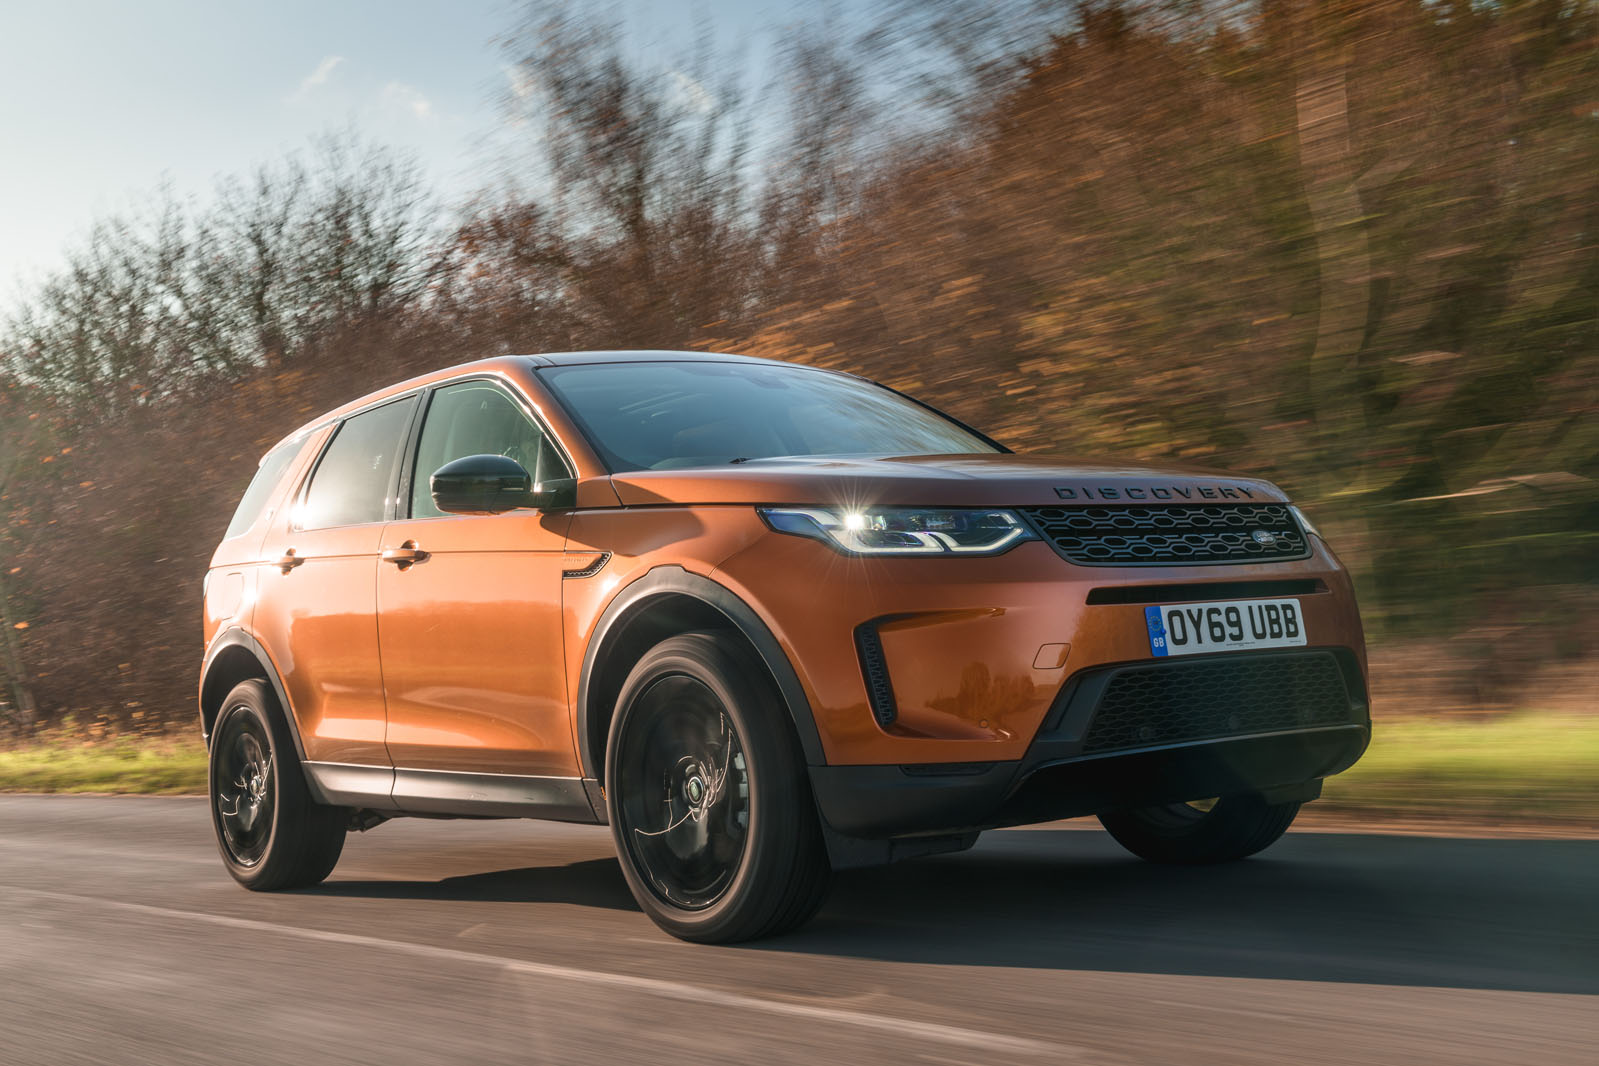 https://www.autocar.co.uk/sites/autocar.co.uk/files/1-land-rover-discovery-sport-2020-rt-hero-front.jpg